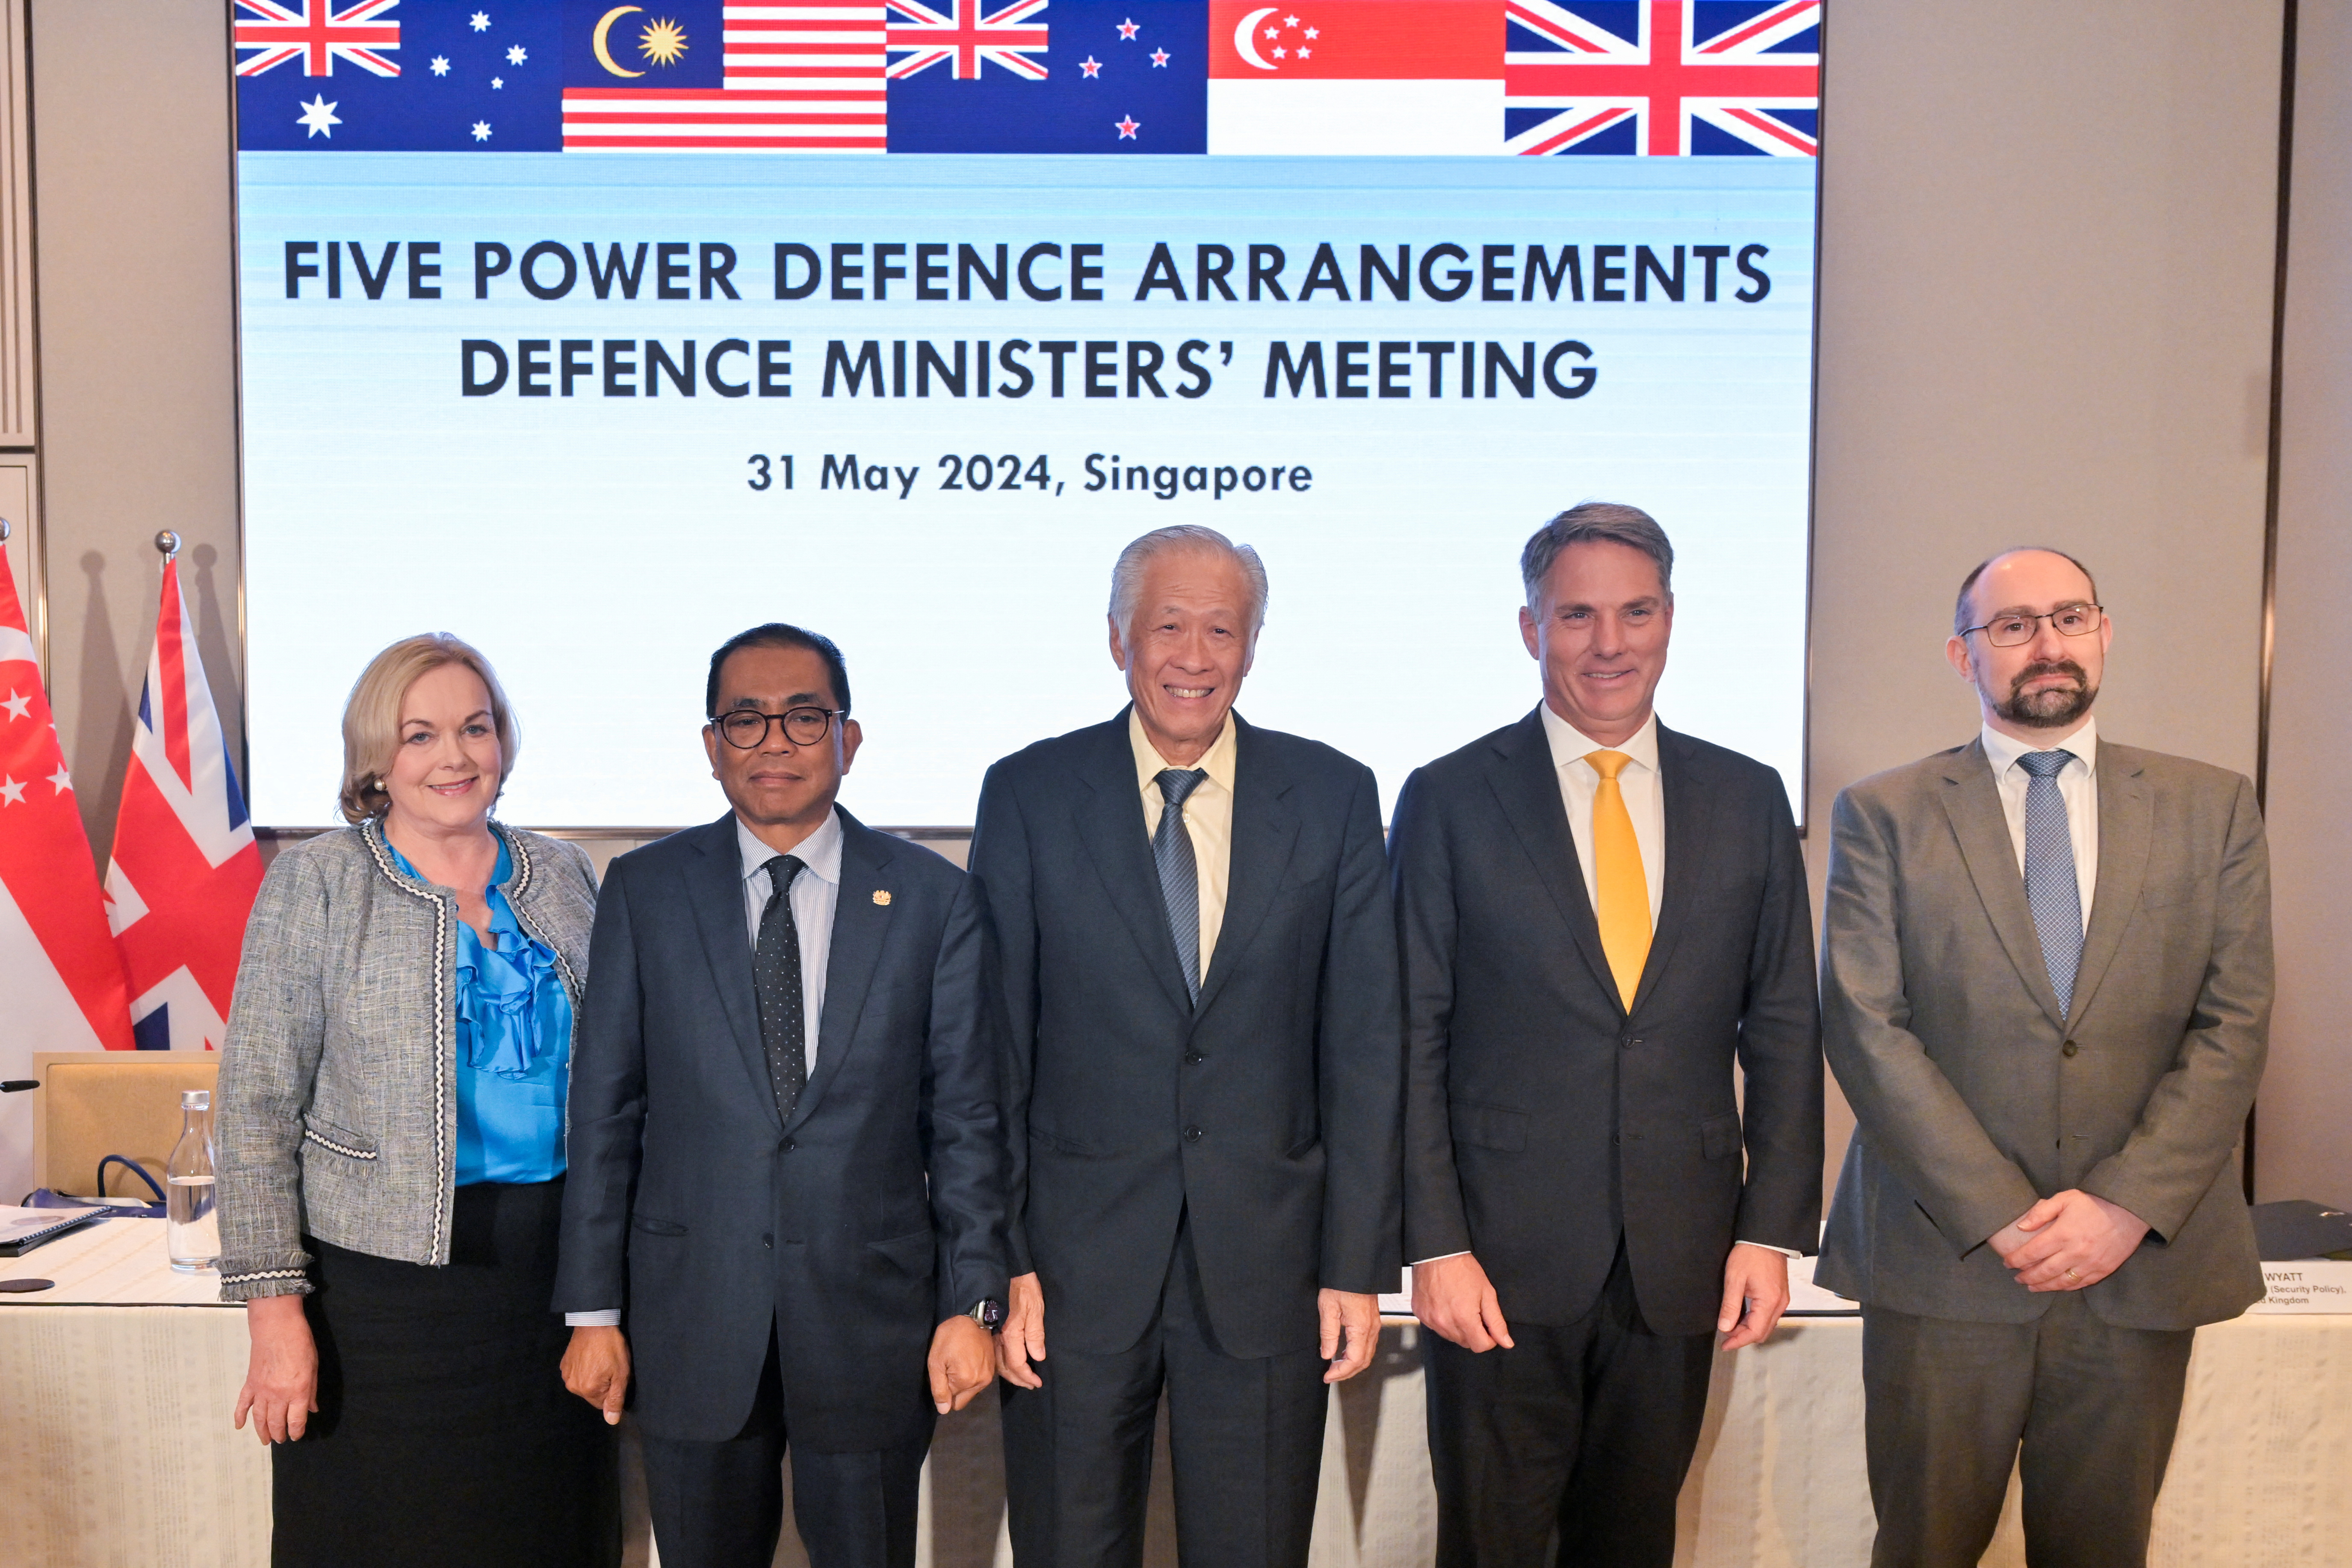 Five Power Defence Arrangements (FPDA) Defence Ministers’ Joint Press Conference Meeting (FDMM) in Singapore